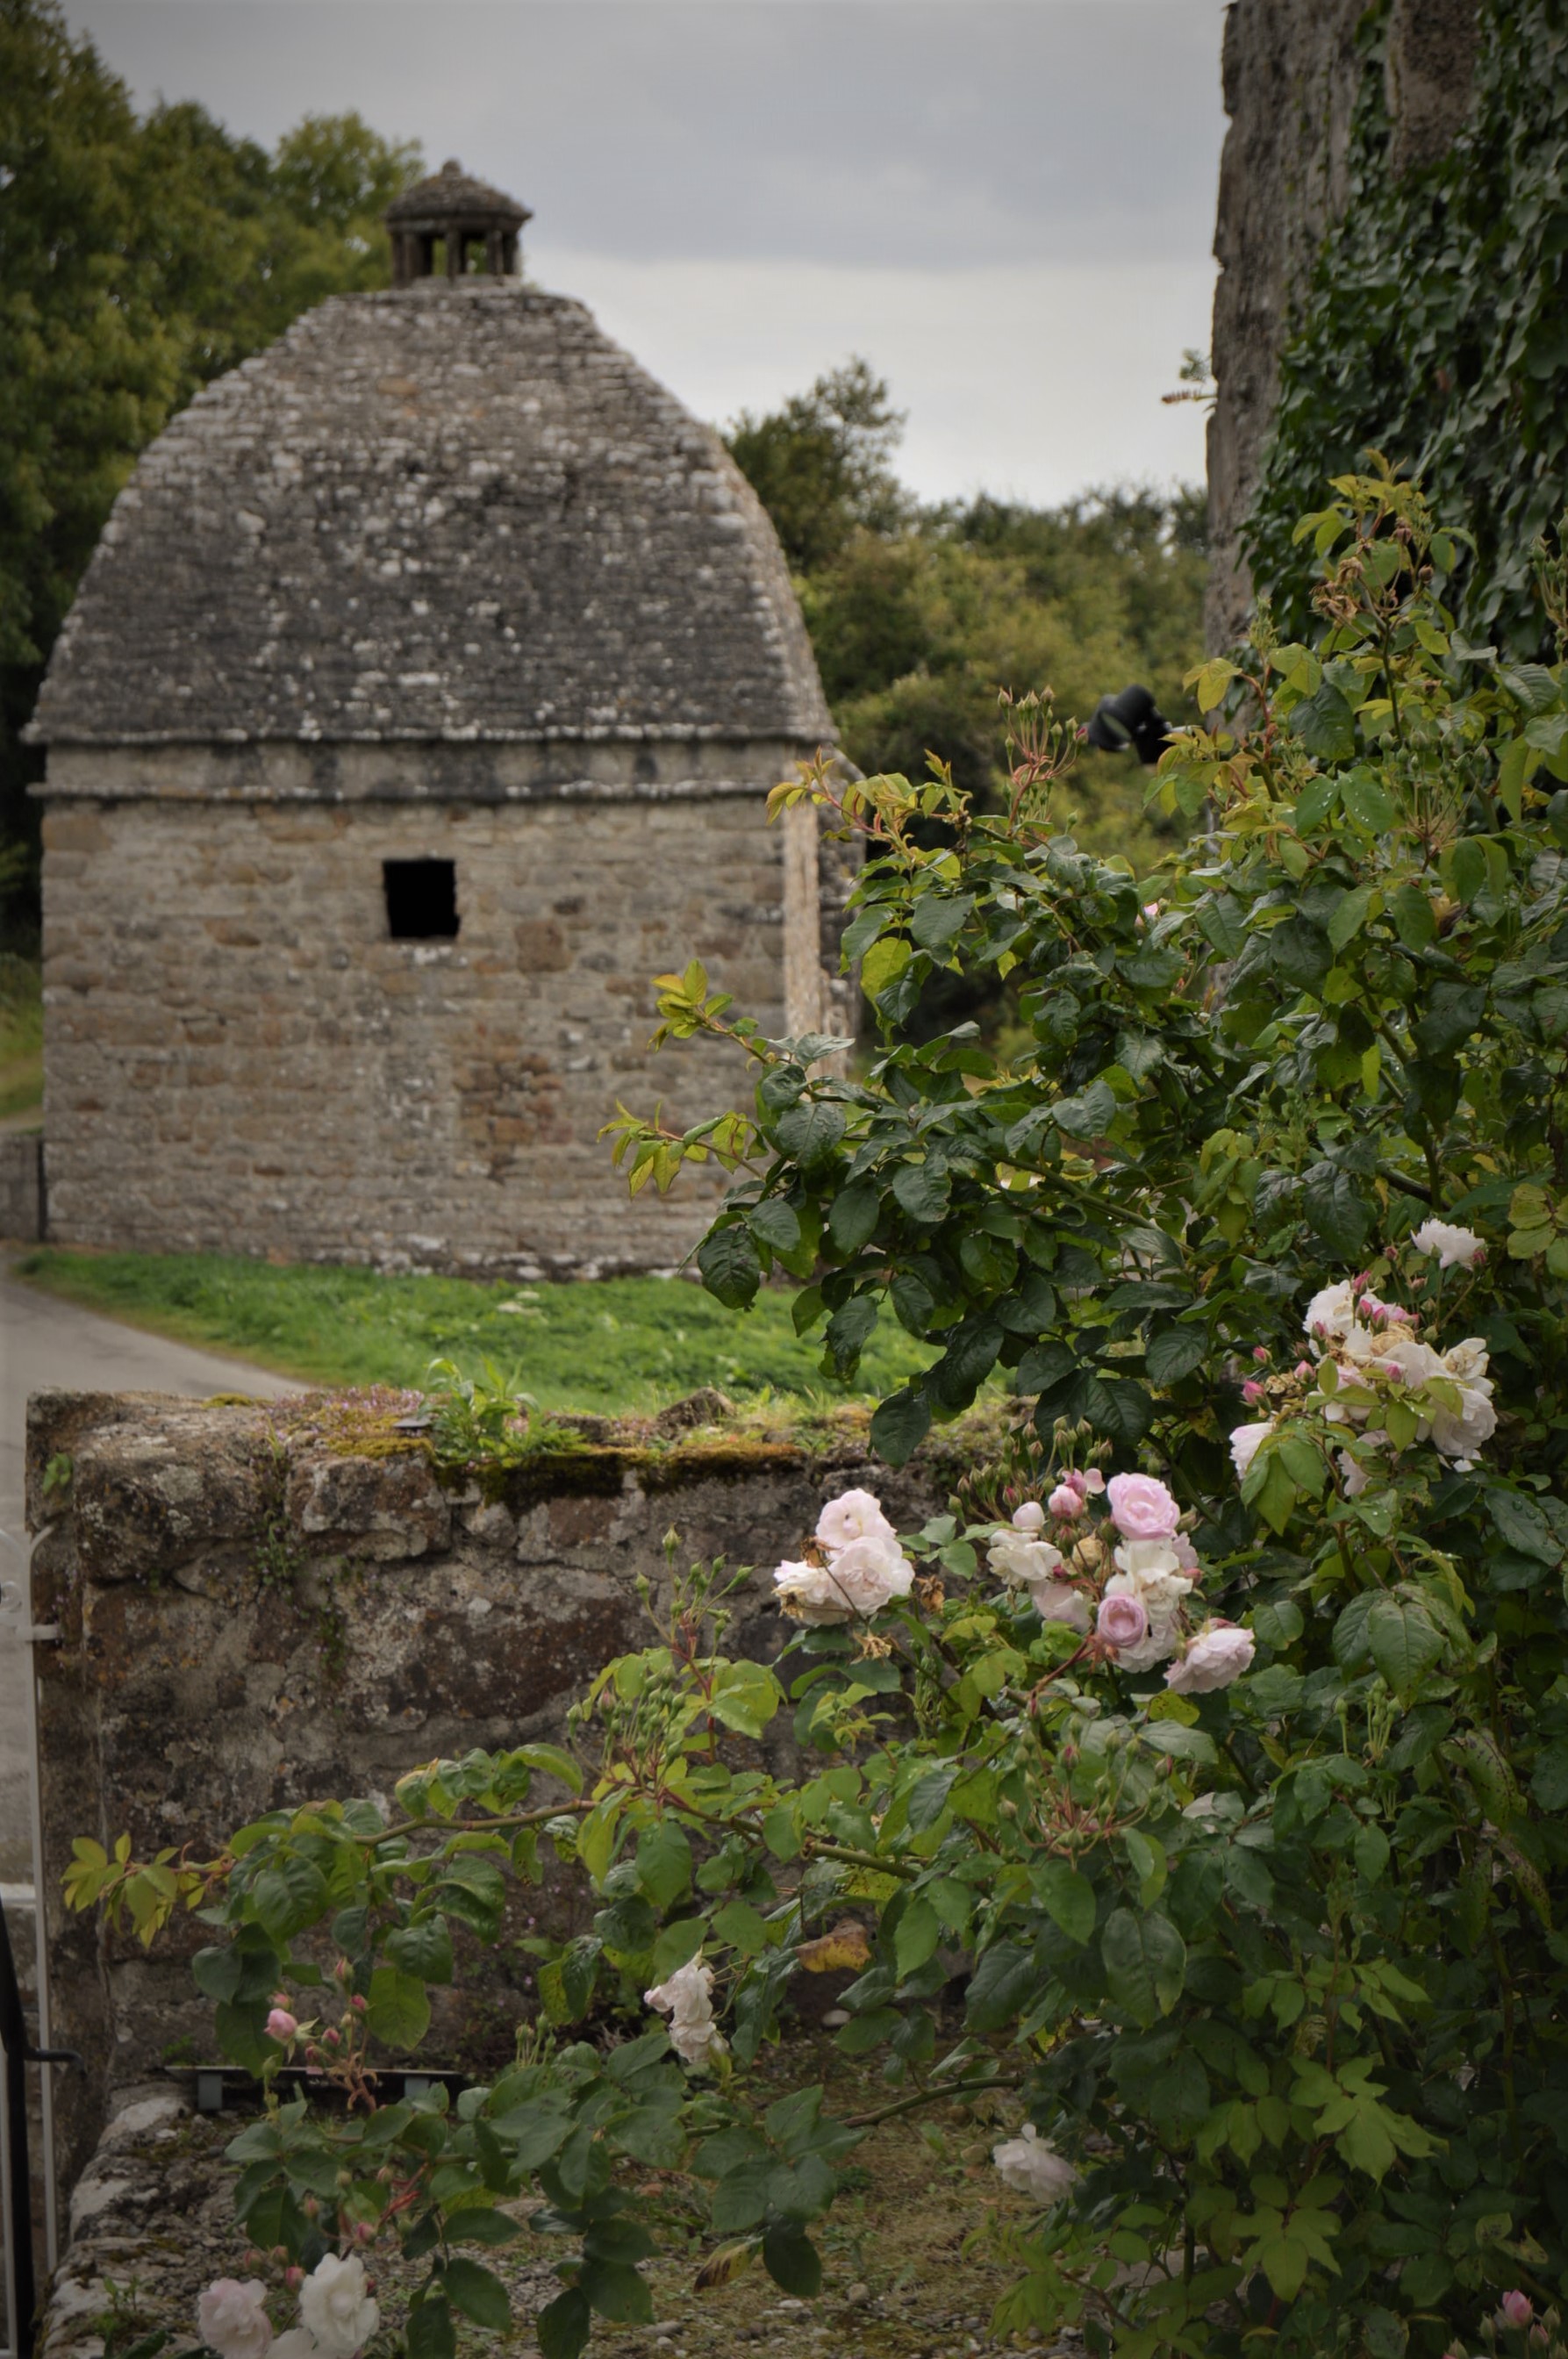 One of largest Dovecotes in Britain